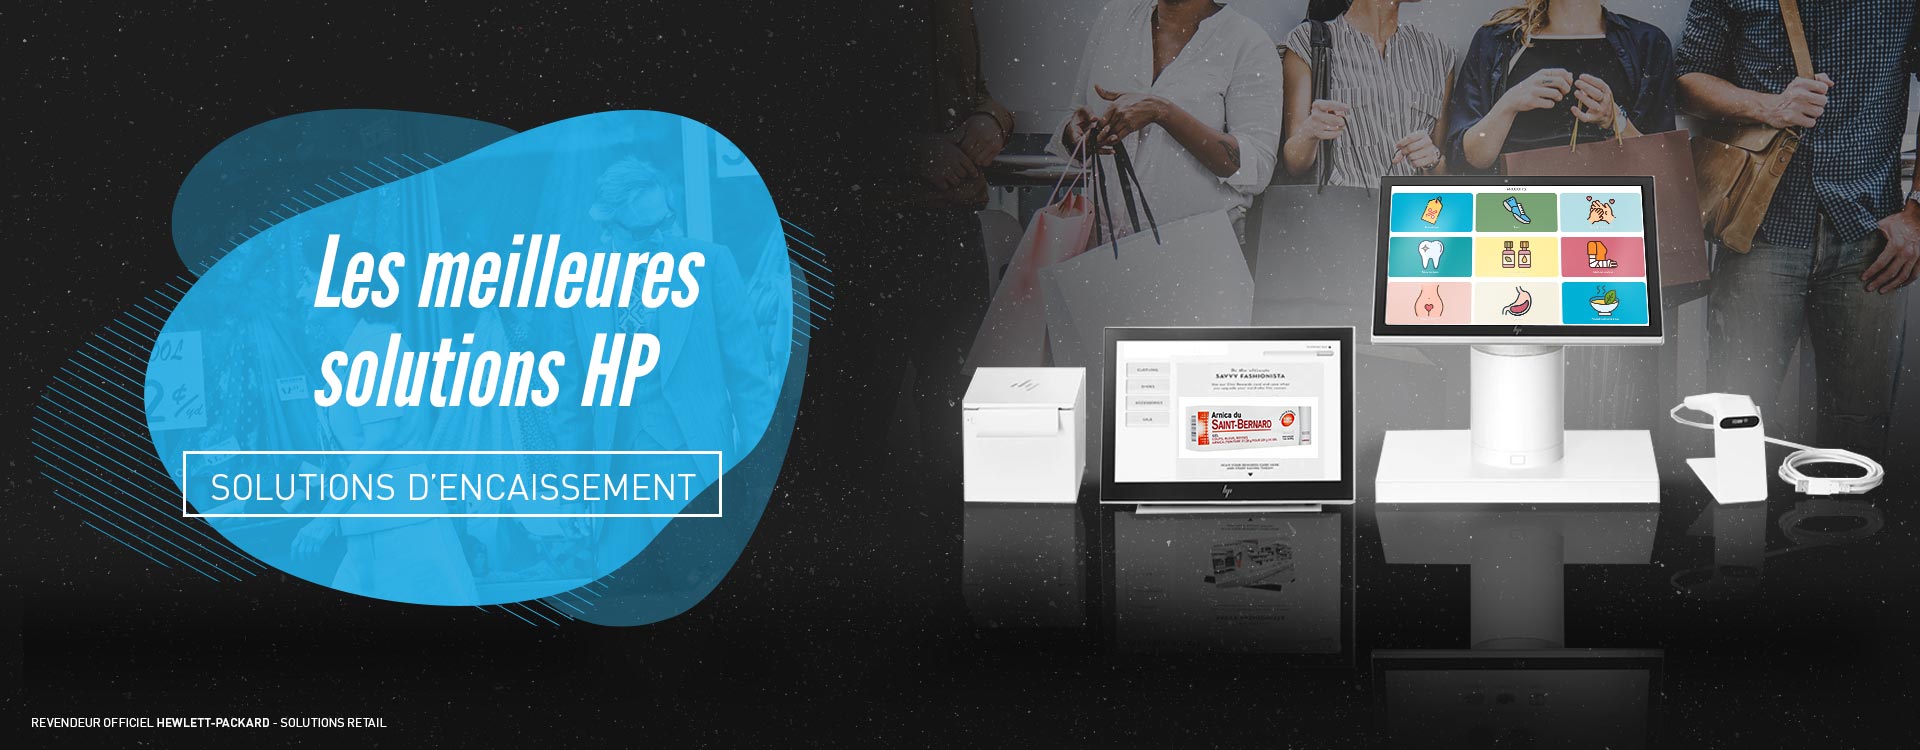 Nos solutions HP - Prime Go & Engage